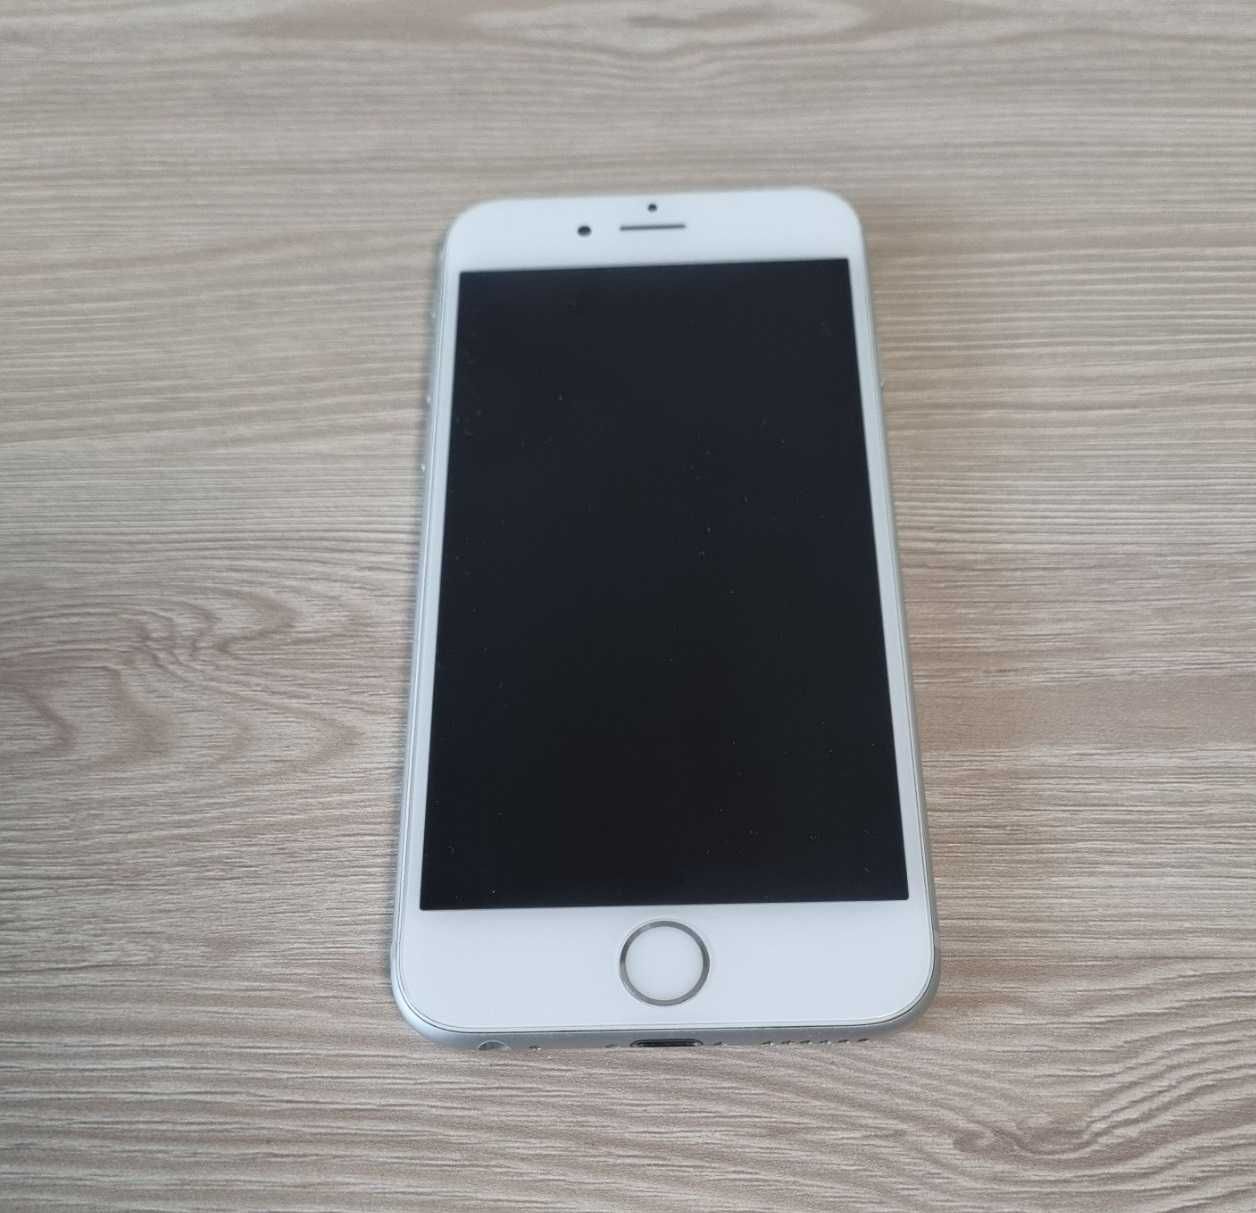 iPhone 6s 32GB Silver